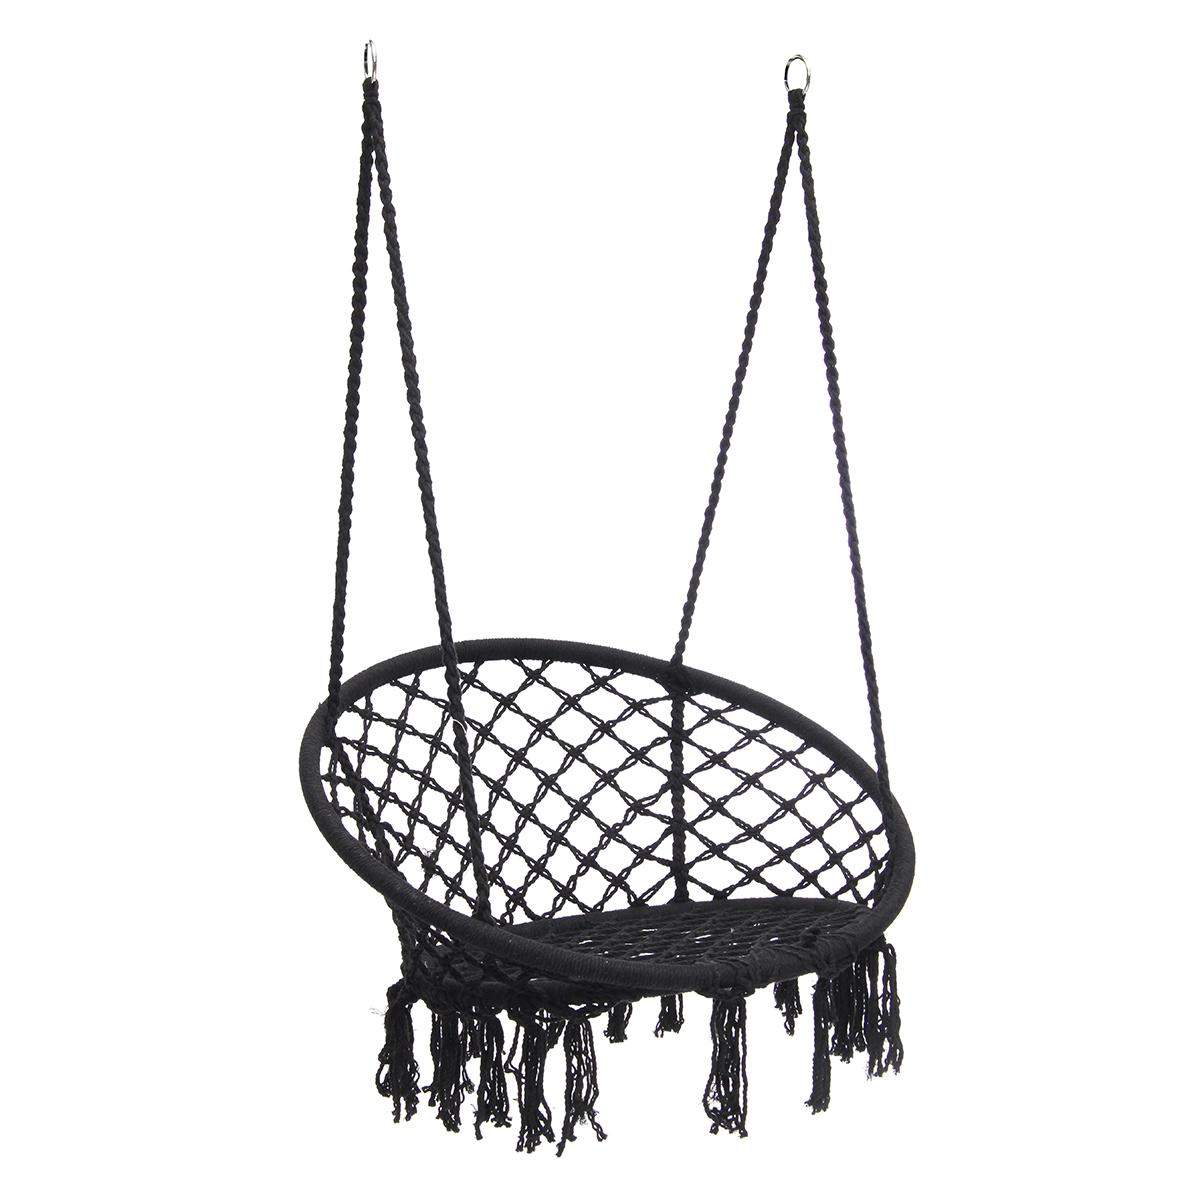 AUGIENB Hammock Chair Hanging Chairs Mesh Woven Macrame Swing Garden Indoor Outdoor Home Decor,100/120/150KG Load-Bearing Christmas Gift - image 1 of 7